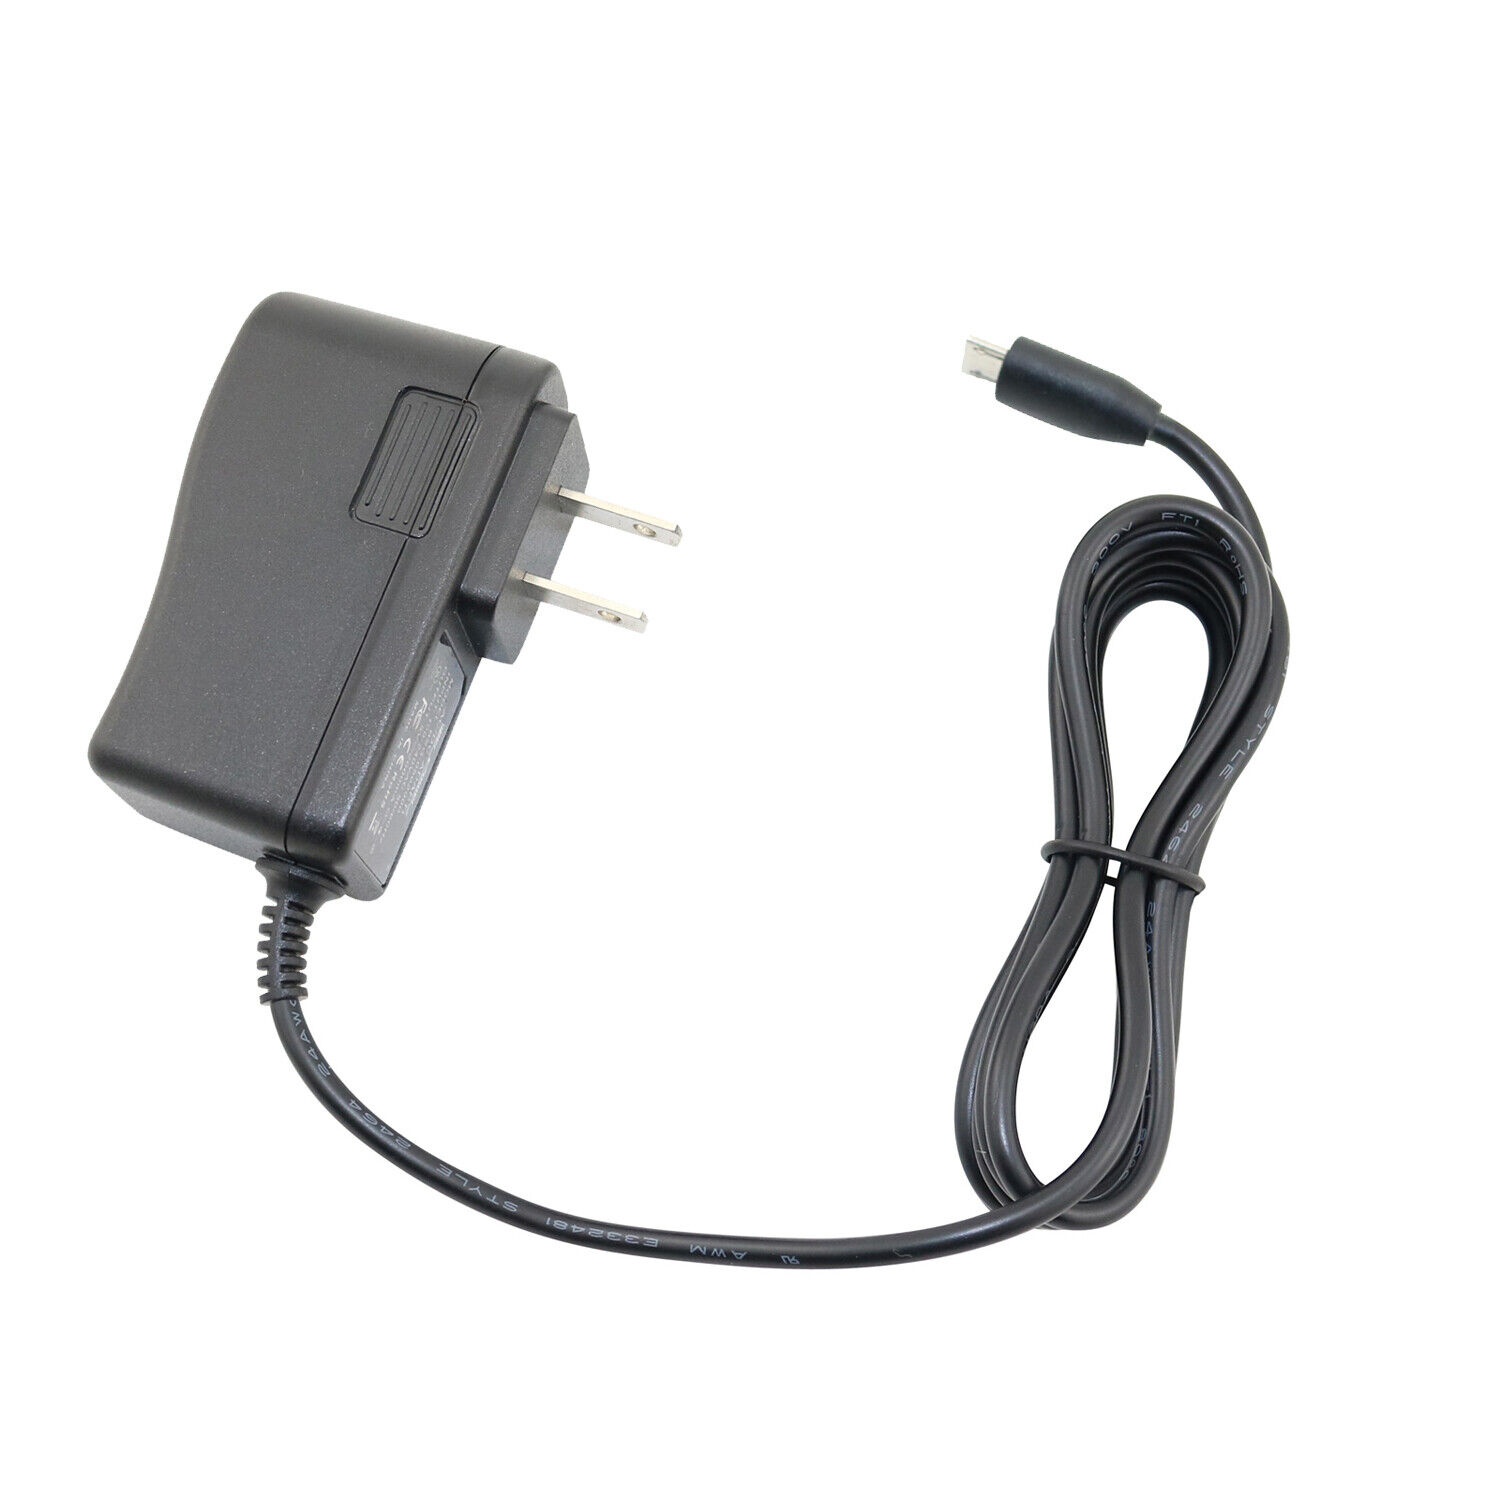 AC Adapter For AR Acoustic Research AW811 AW822 Wireless Speaker Transmitter PSU Technical Specifications: Input Voltag